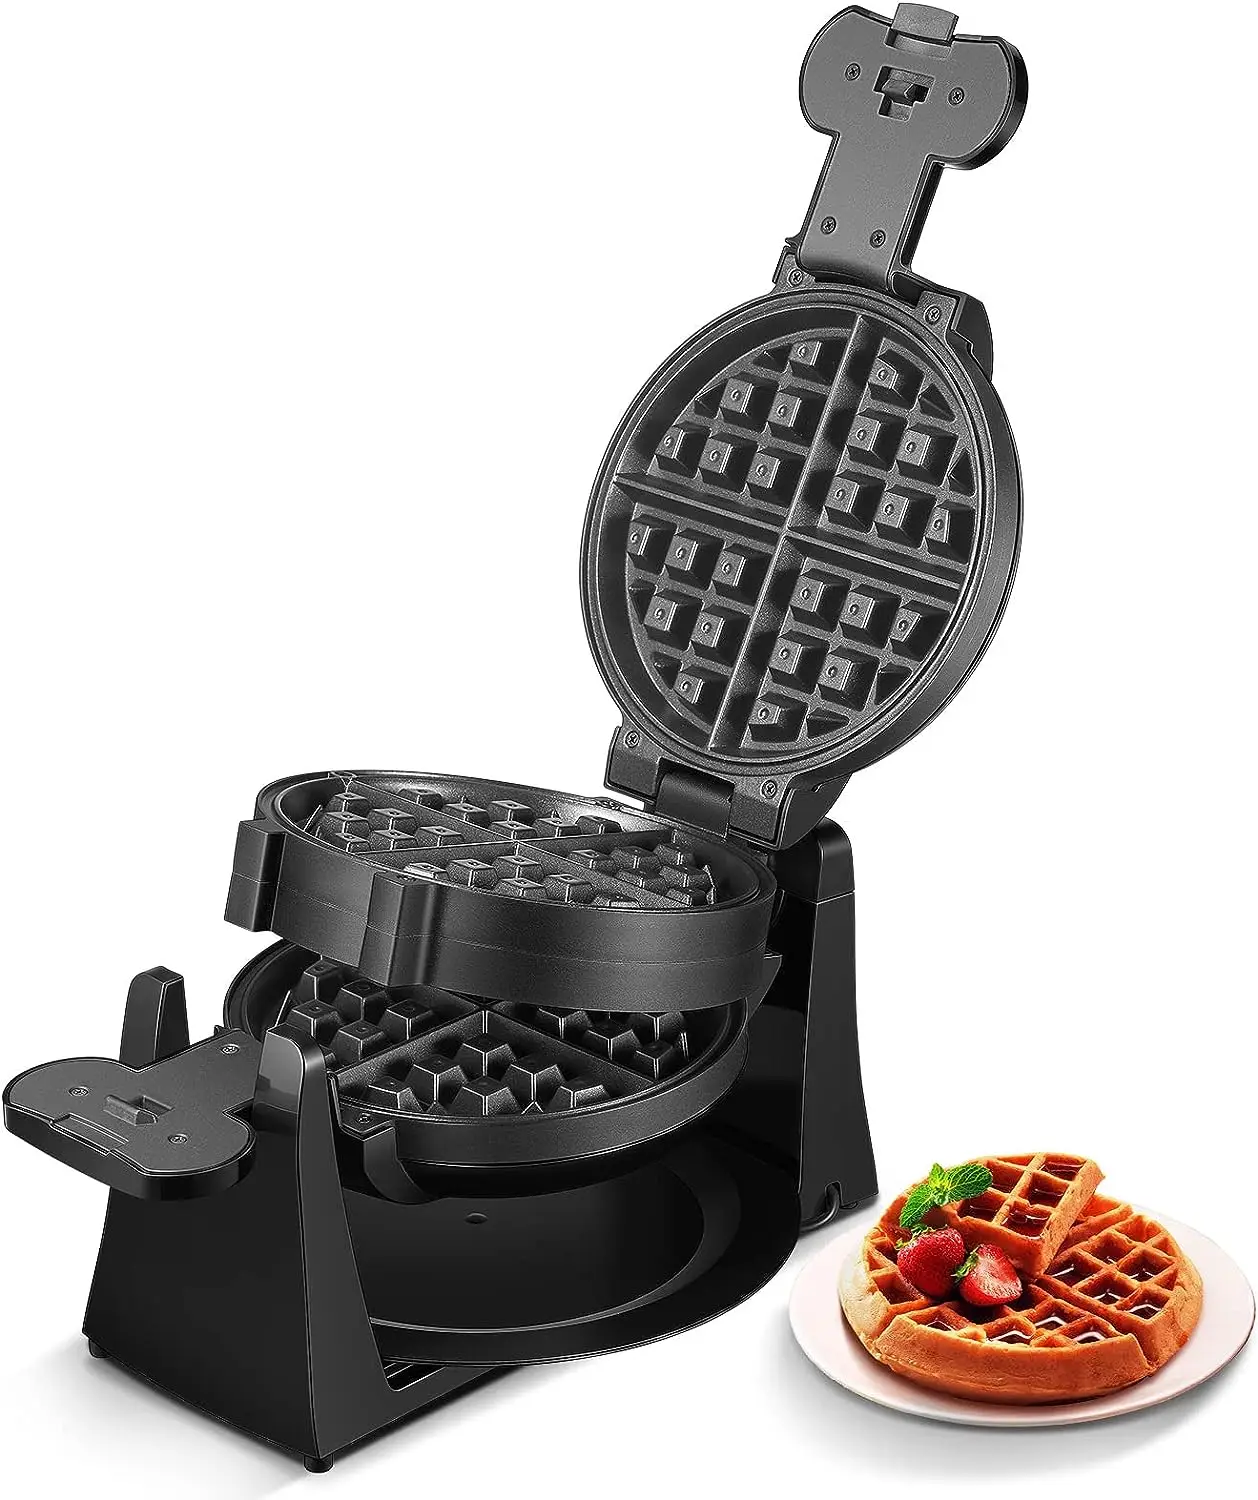 

Maker, Belgian Waffle Maker Iron 180° Flip Double Waffle, 8 Slices, Rotating & Nonstick Plates, Removable Drip Tray, Cool T